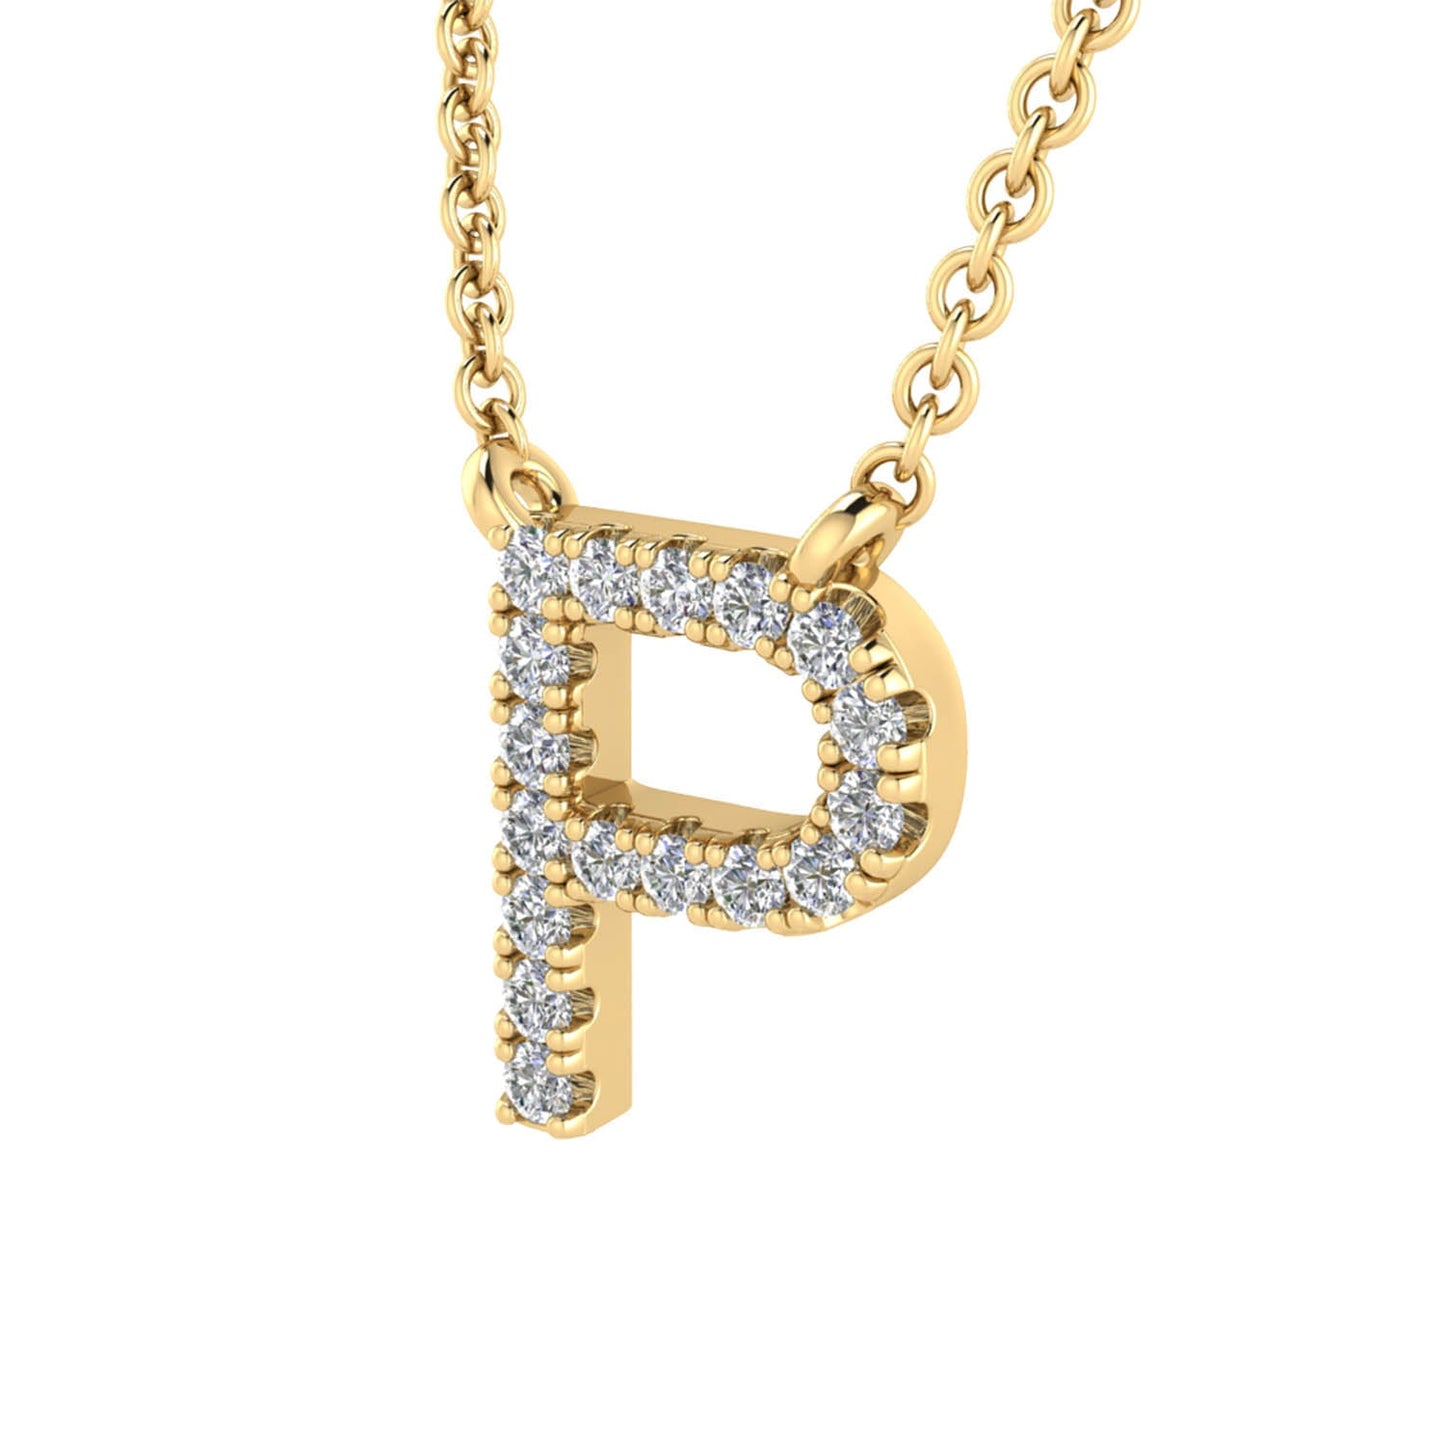 Initial 'P' Necklace wth 0.06ct Diamonds in 9K Yellow Gold - PF-6278-Y